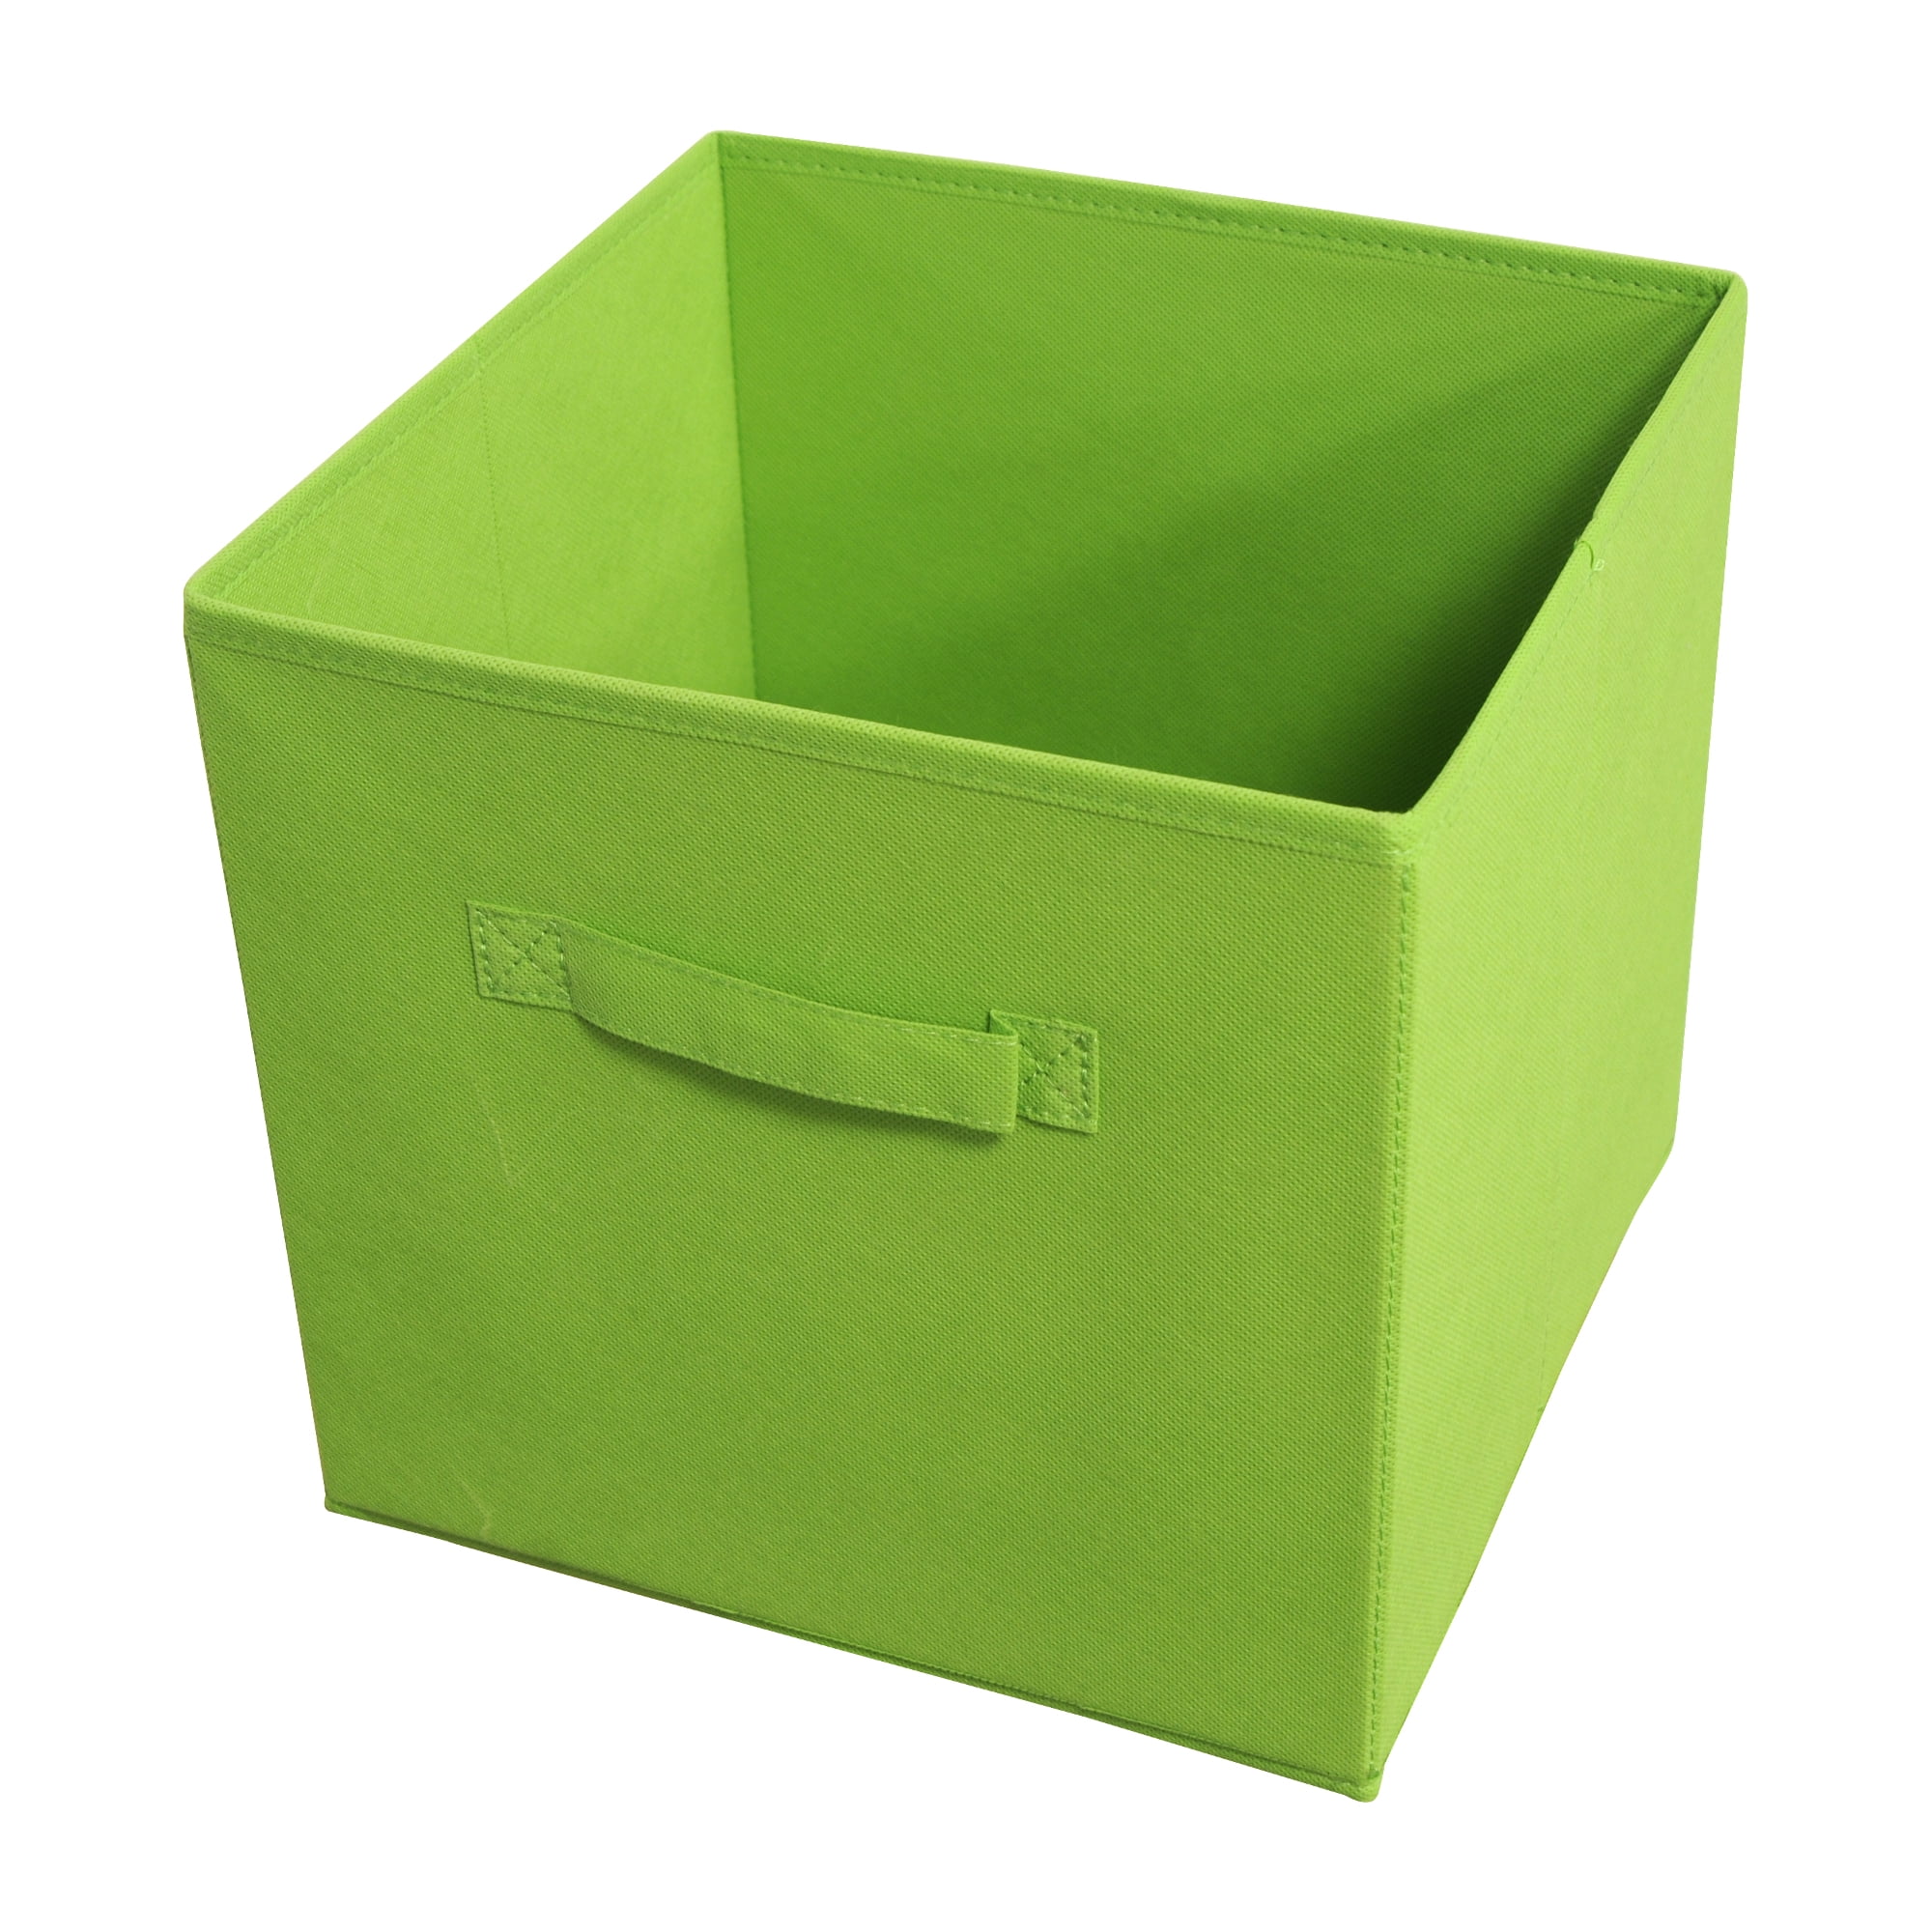 Picture of Achim STRGBNGR04 10.60 x 10.60 x 11 in. Collapsible Storage Bins, Green